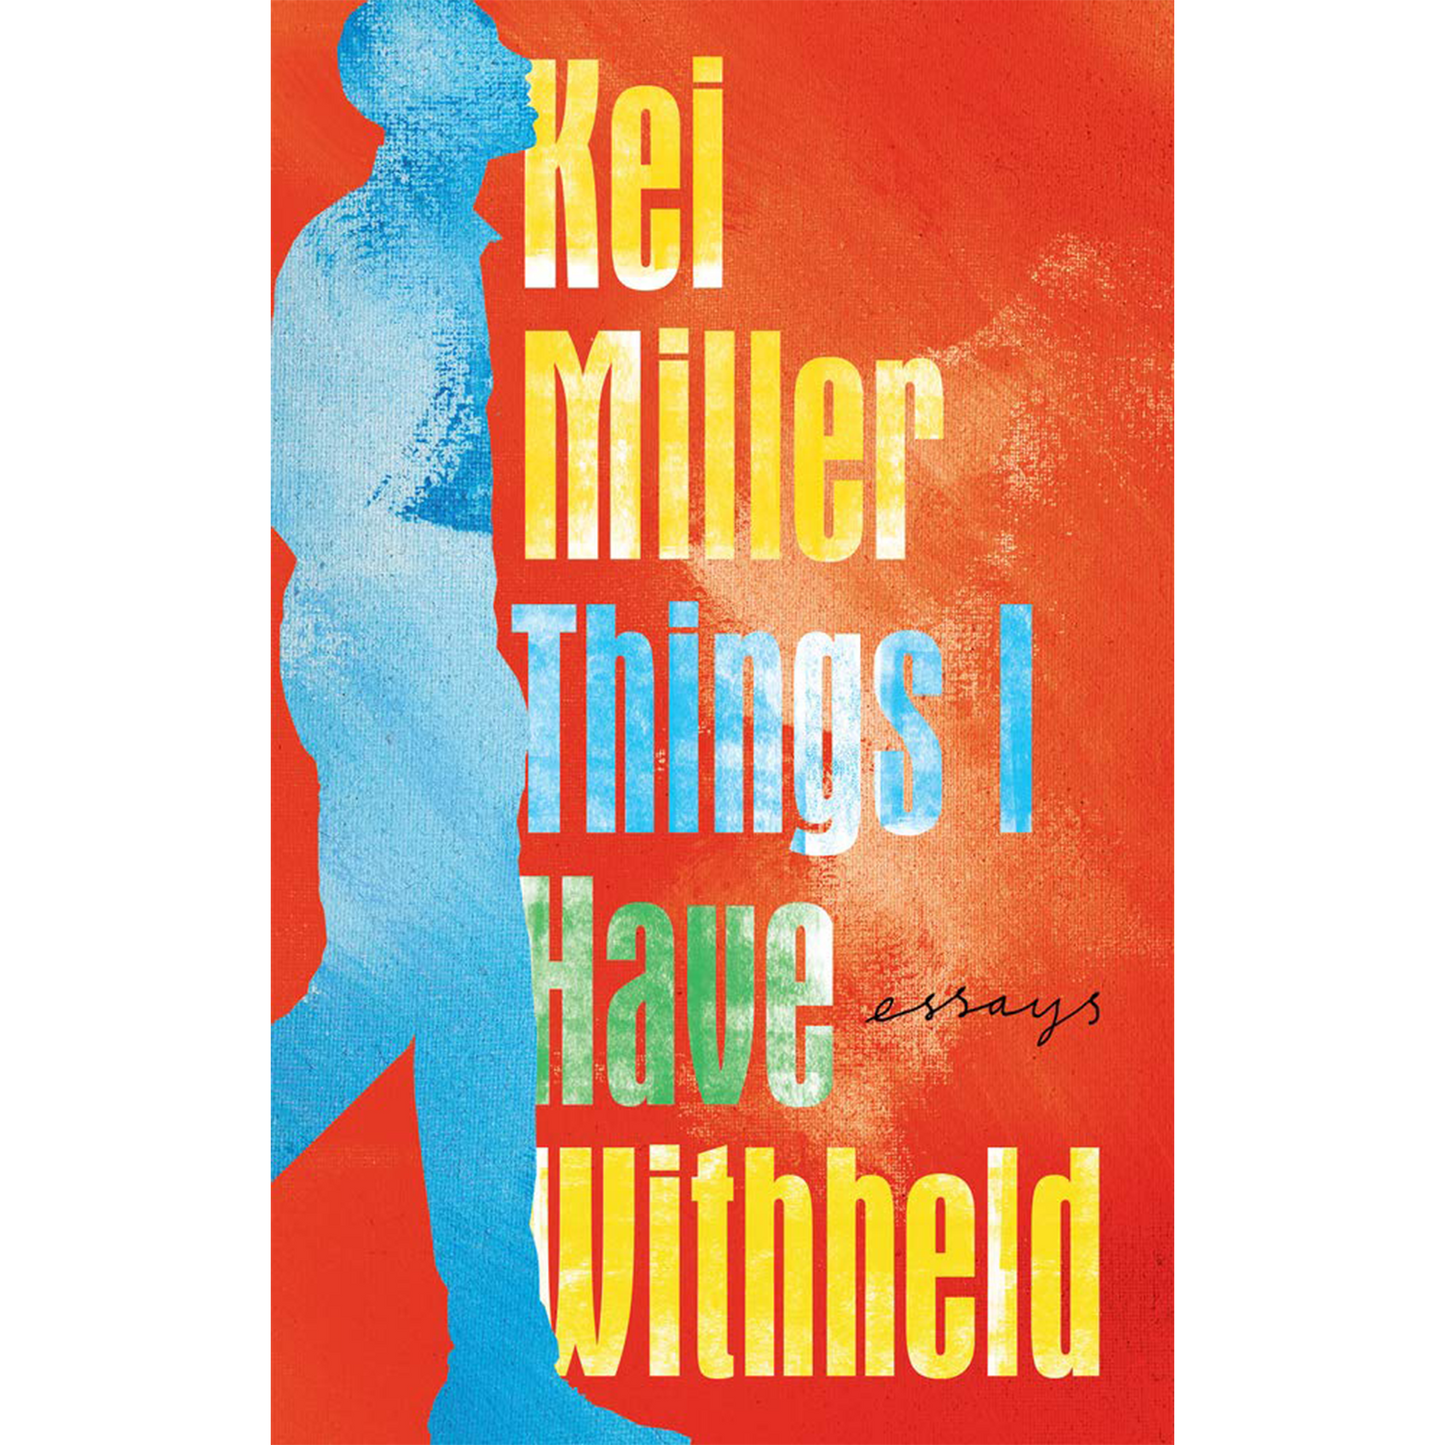 Things I Have Withheld (Hardcover)